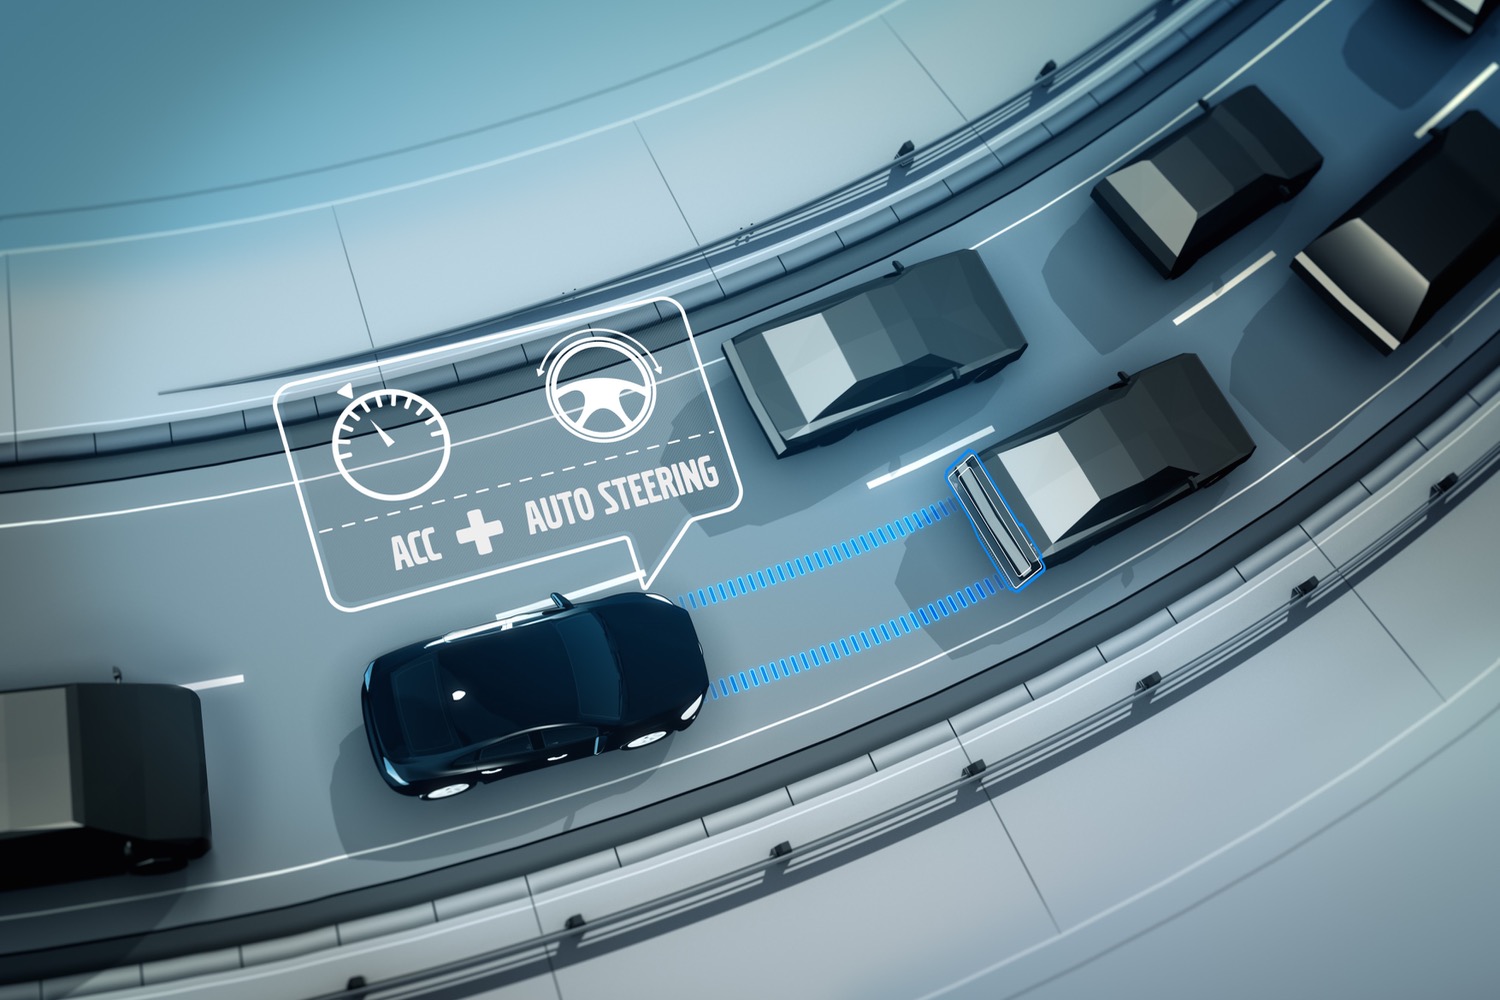 What Is: Adaptive Cruise Control? 